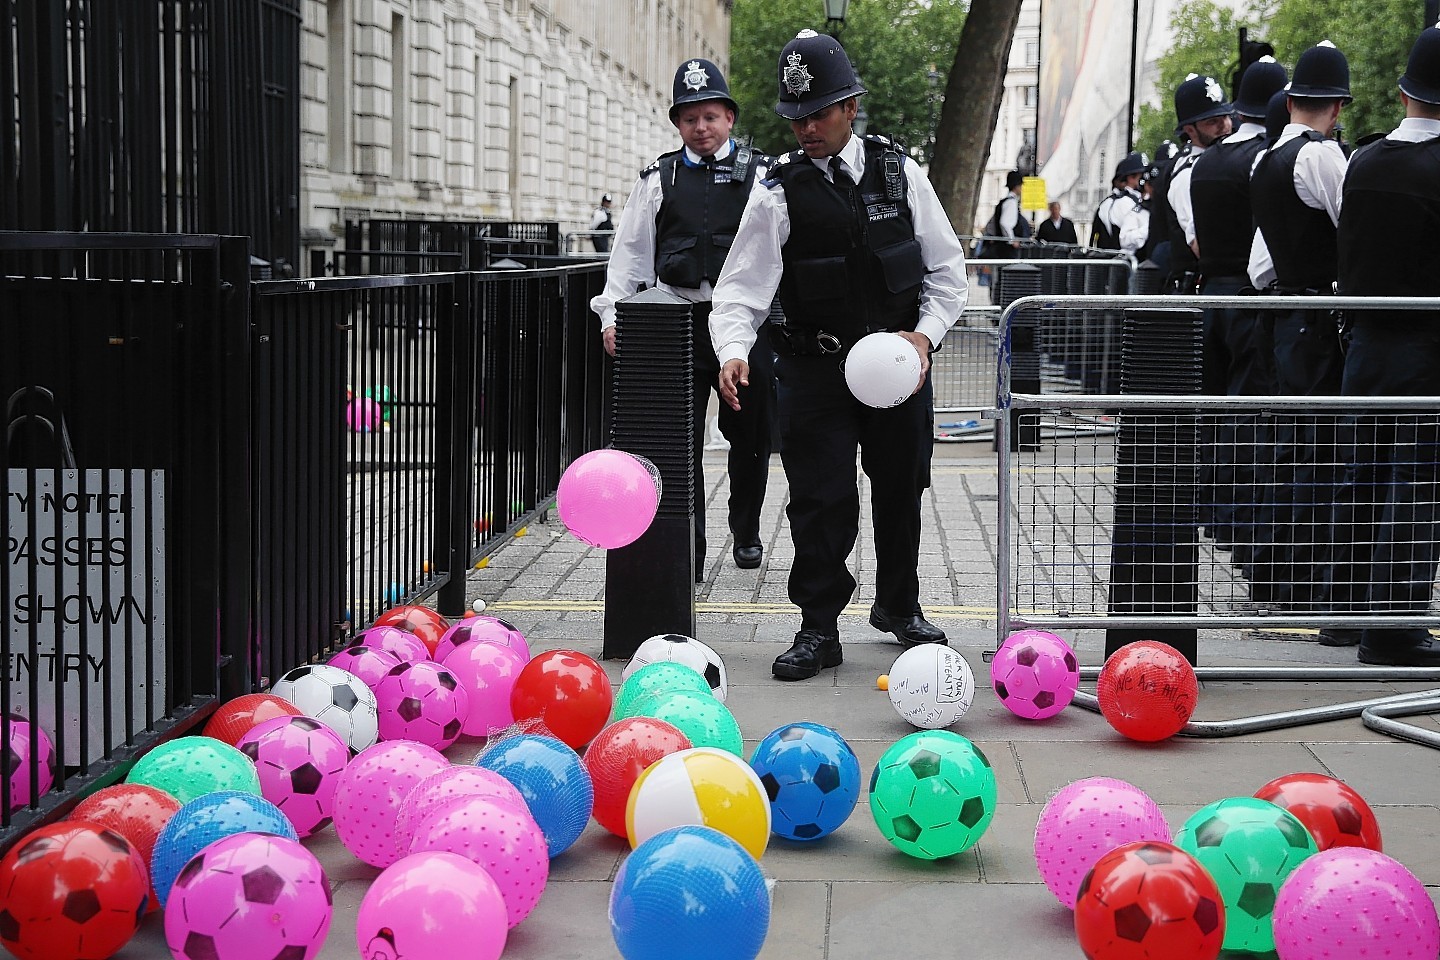 Anti austerity protesters throw balls towards Downing Street